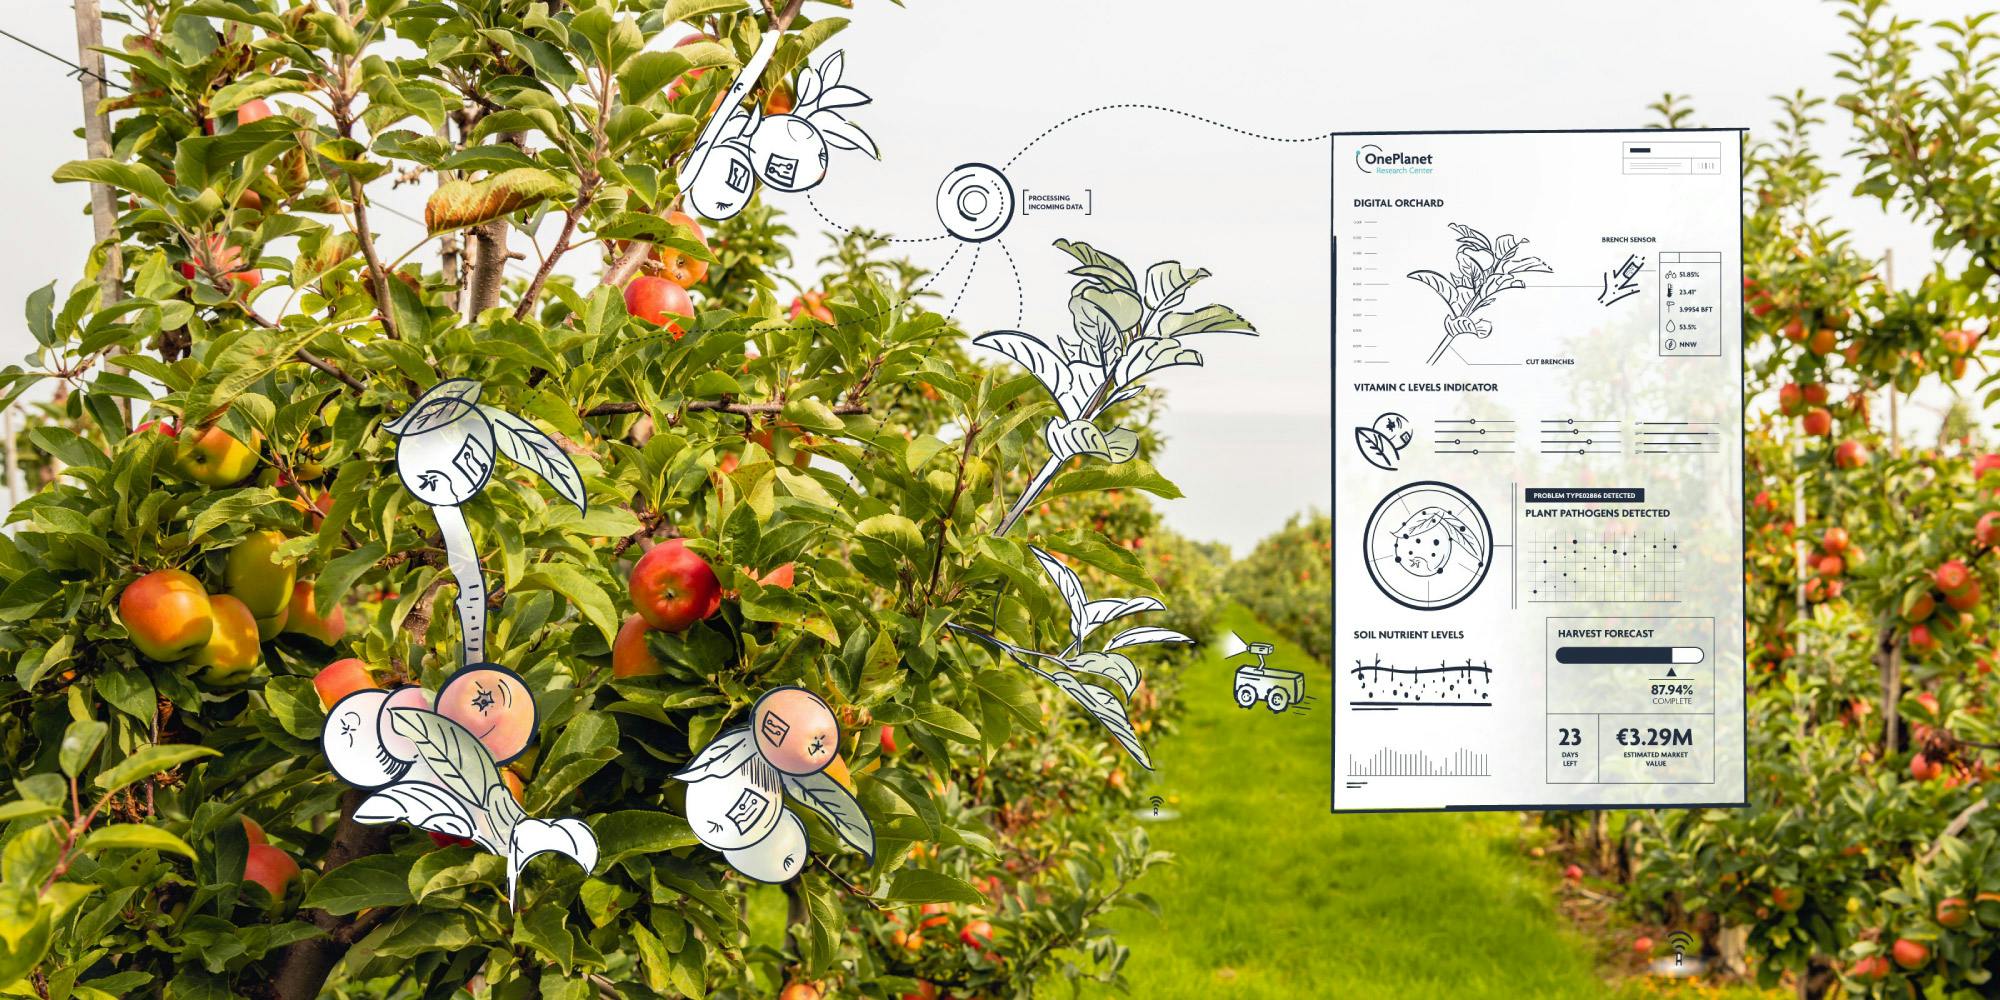 OnePlanet delivers innovative applications for sustainable farming and food supply